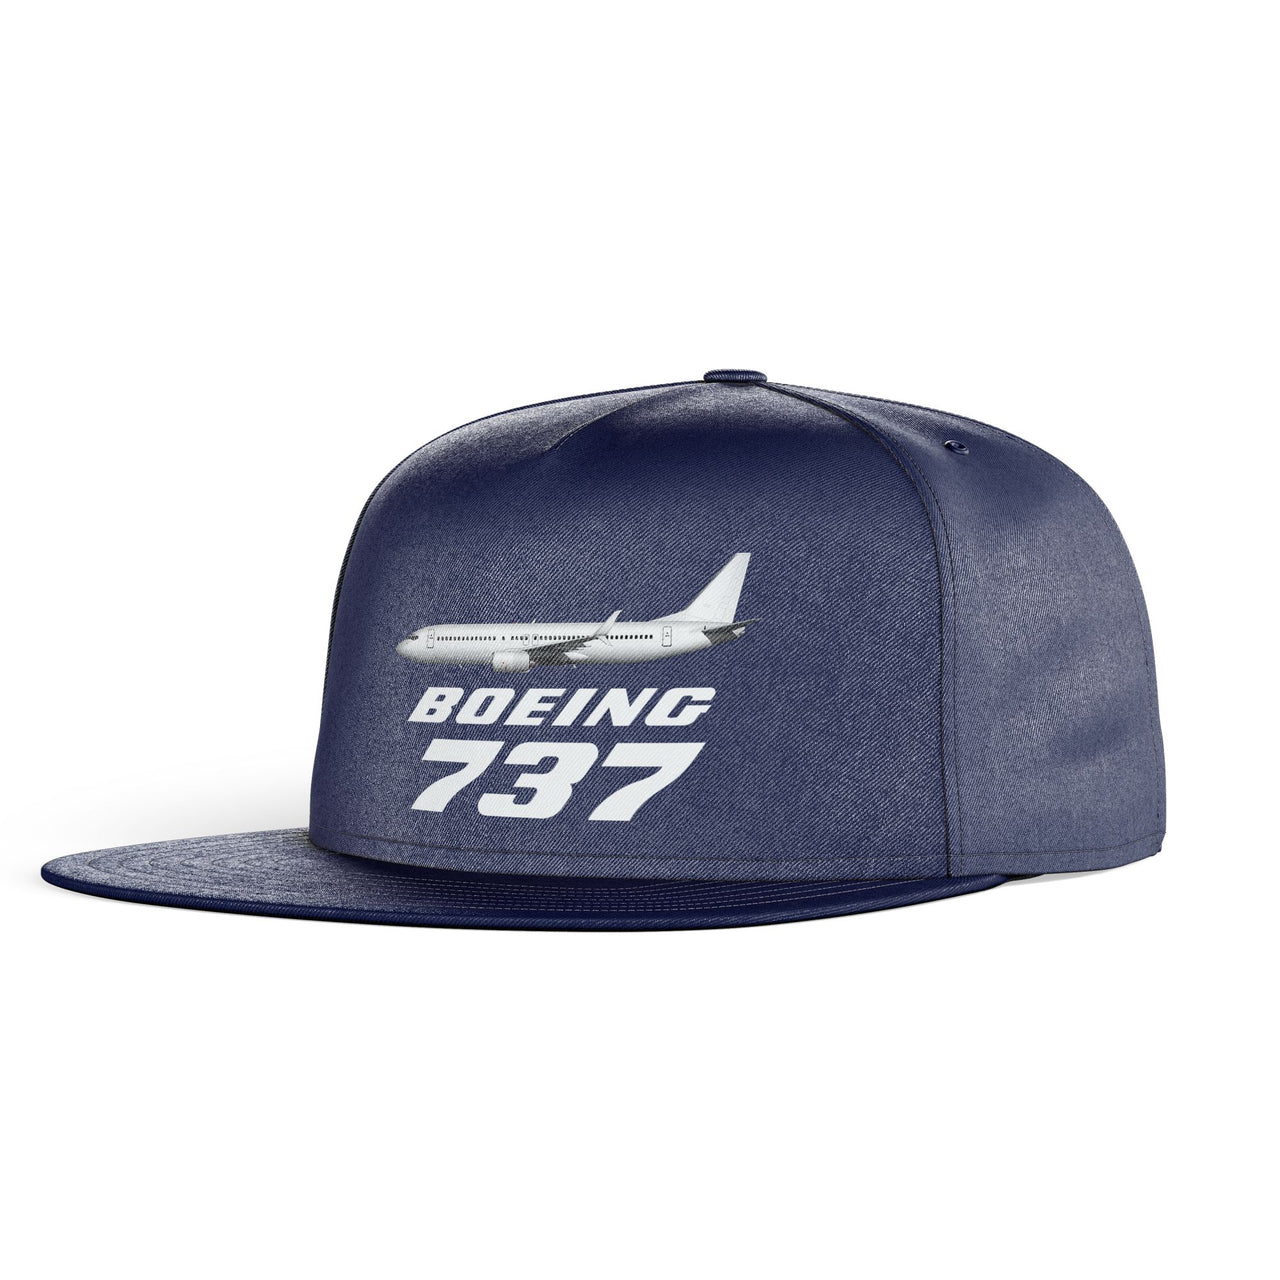 The Boeing 737 Designed Snapback Caps & Hats